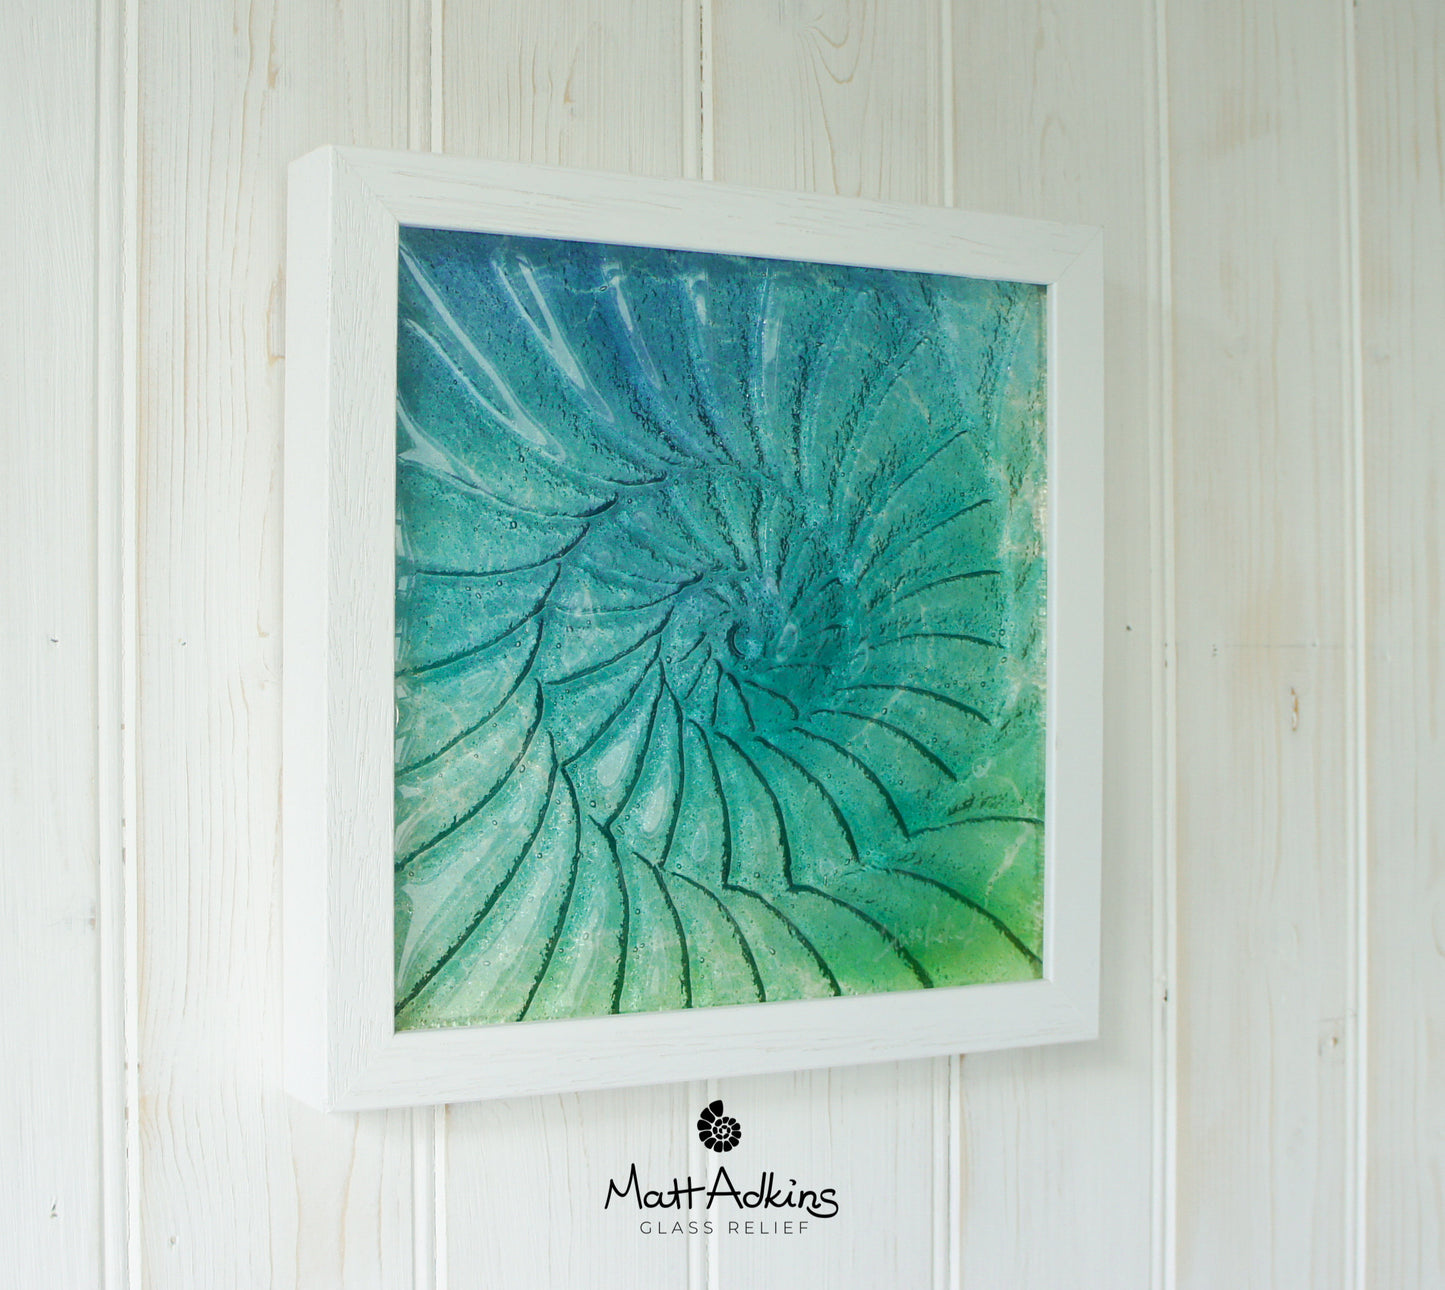 Ammonite Frame - Small Square - Turquoise Blue Green - 25x25cm (10")